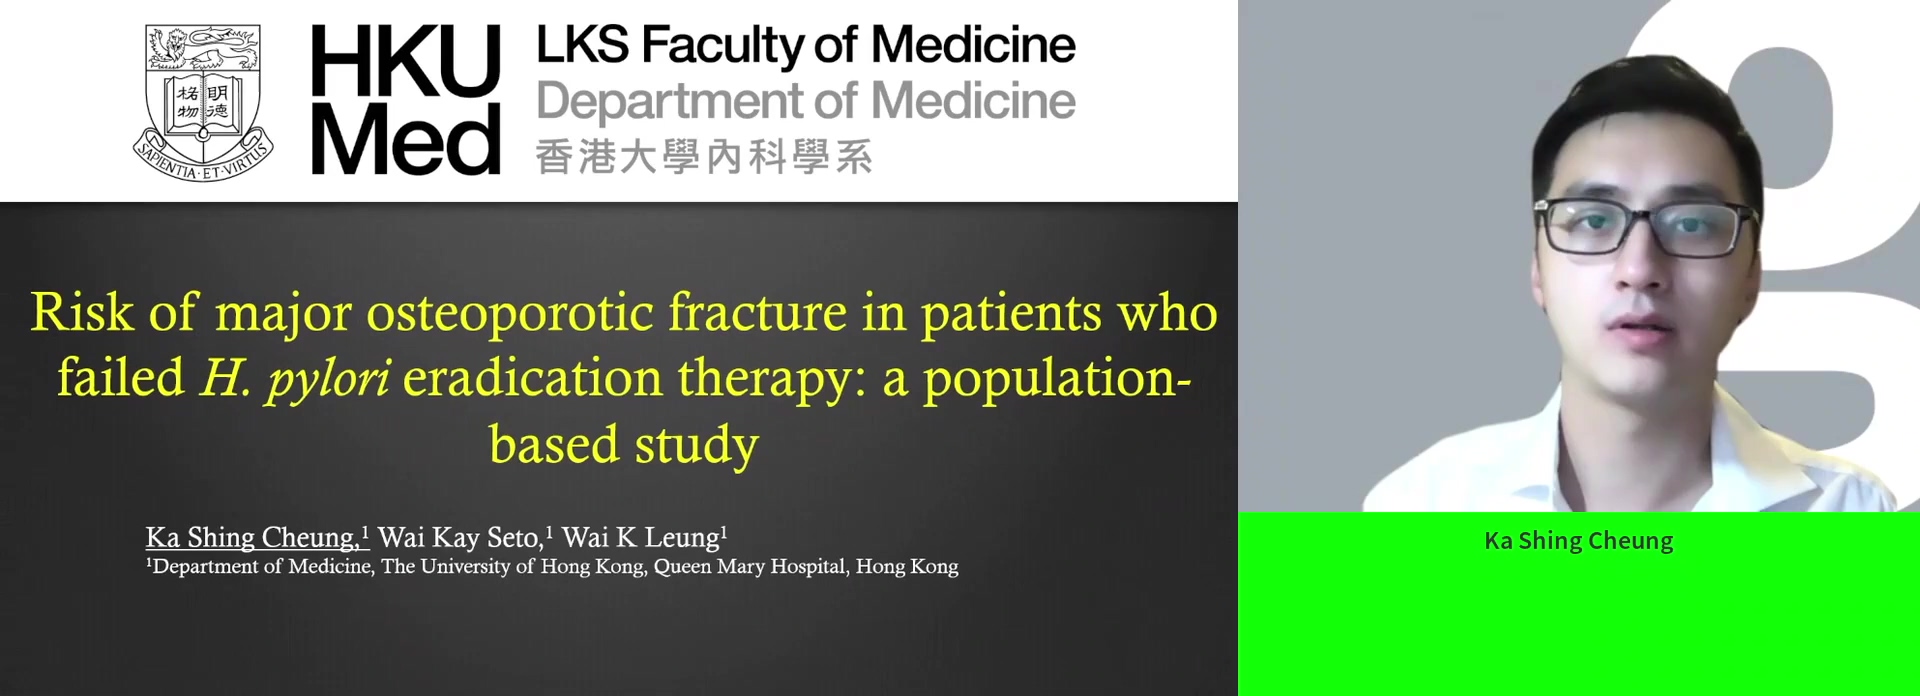 RISKS OF MAJOR OSTEOPOROTIC FRACTURE IN PATIENTS WHO FAILED H. PYLORI ERADICATION THERAPY: A POPULATION-BASED STUDY